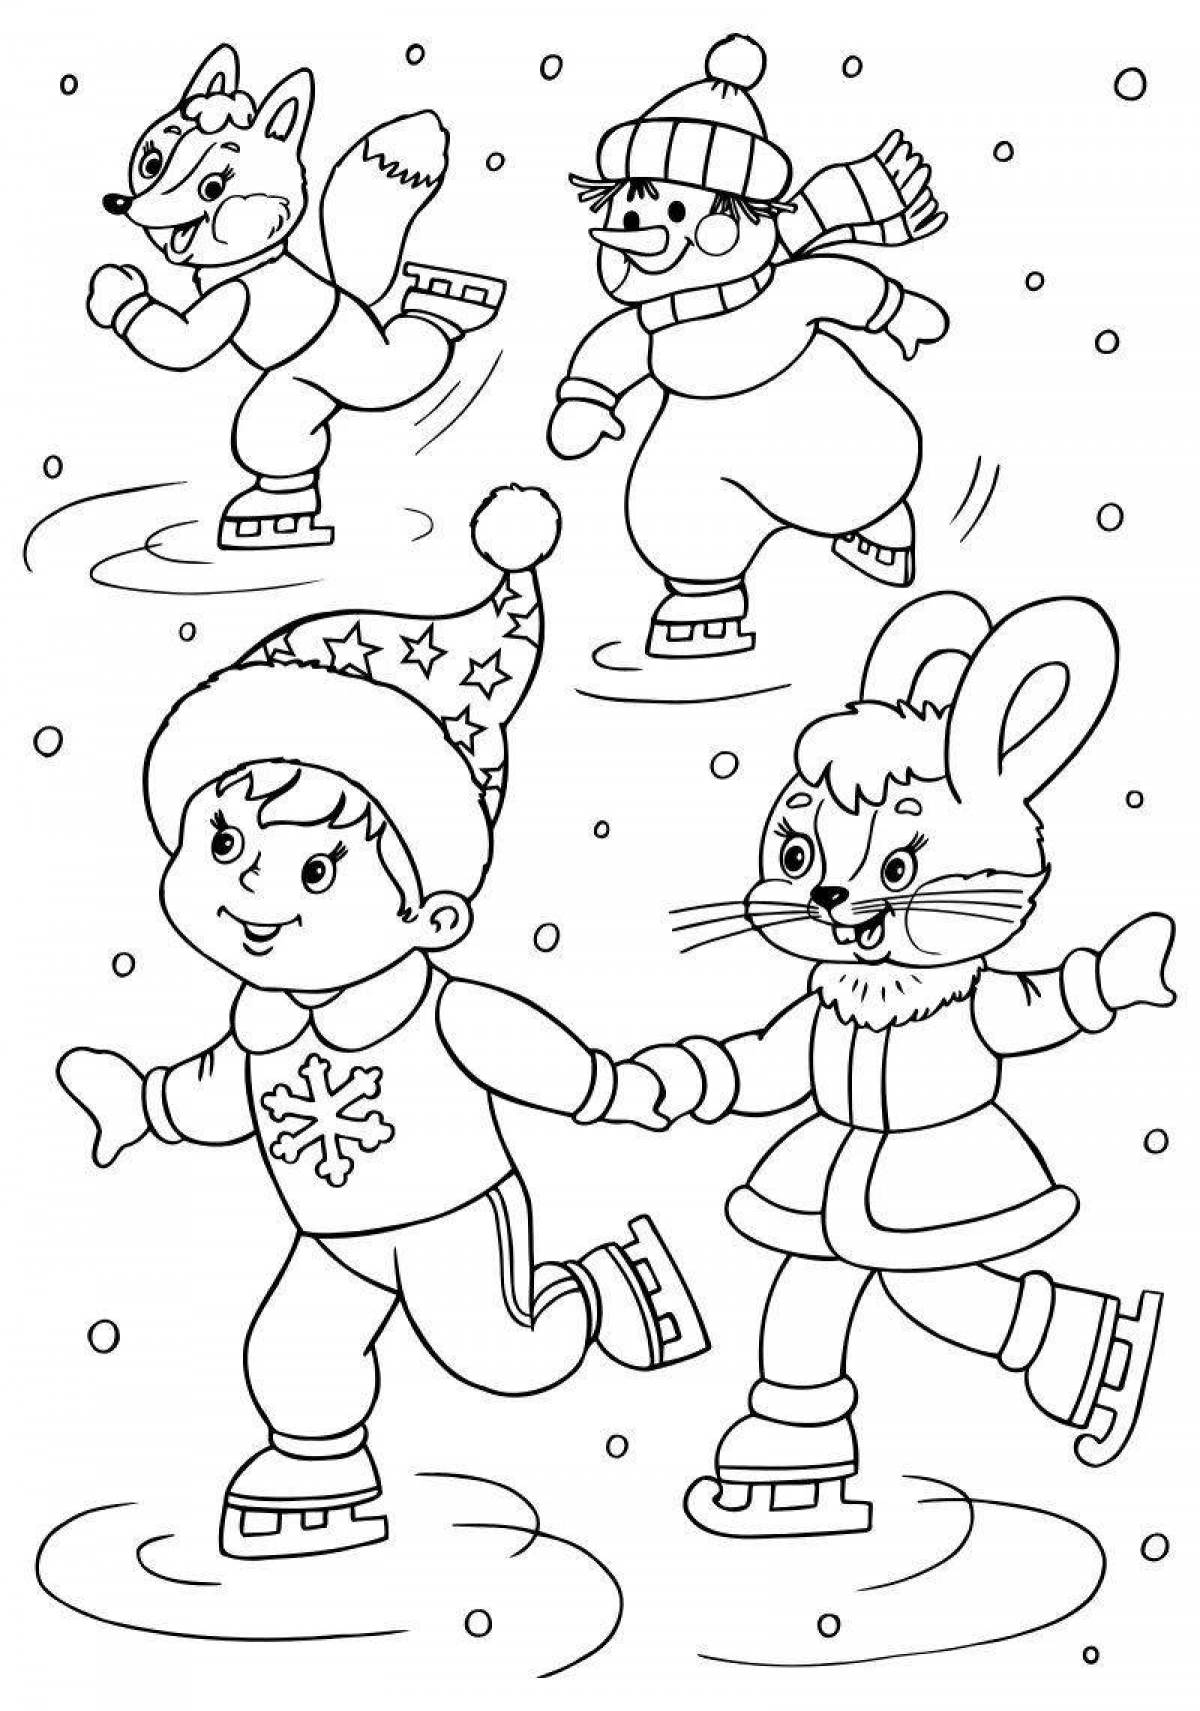 Magic winter coloring book for kids 6-7 years old